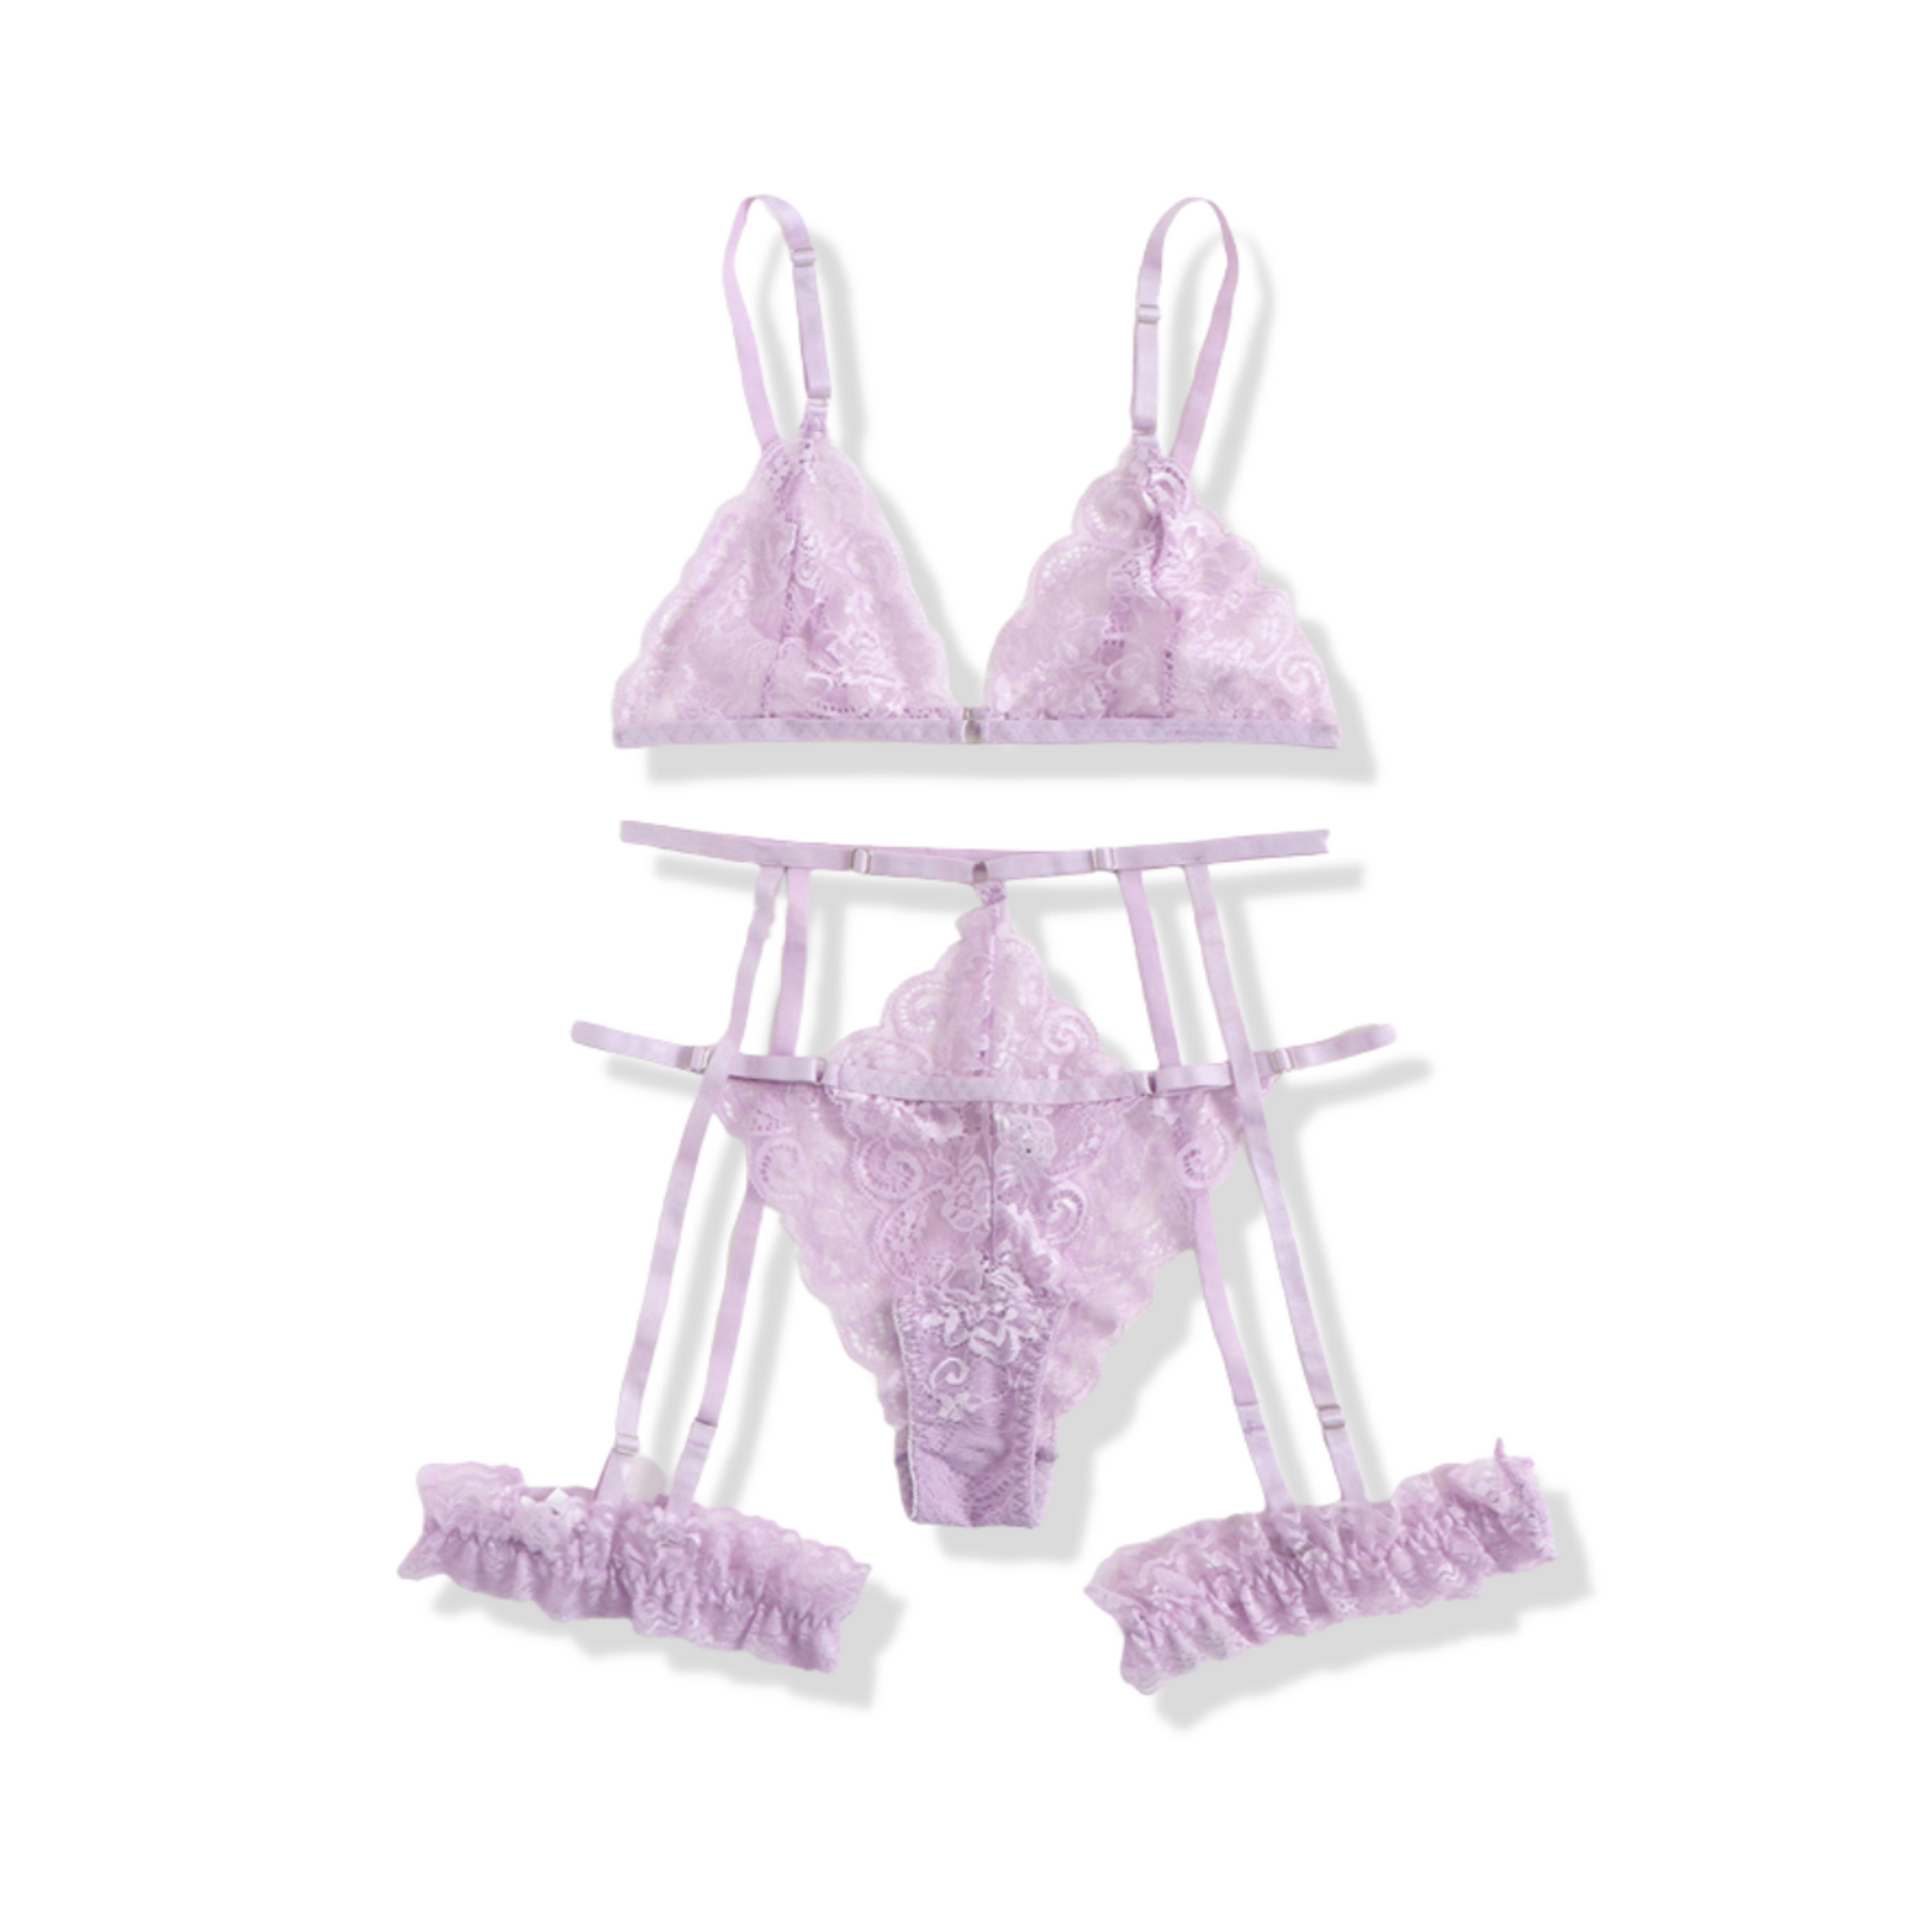 Bestseller Lingerie Full Set - Anissa Atelier Affordable, Unique and  Quality Lingerie and More. For more Femininity!